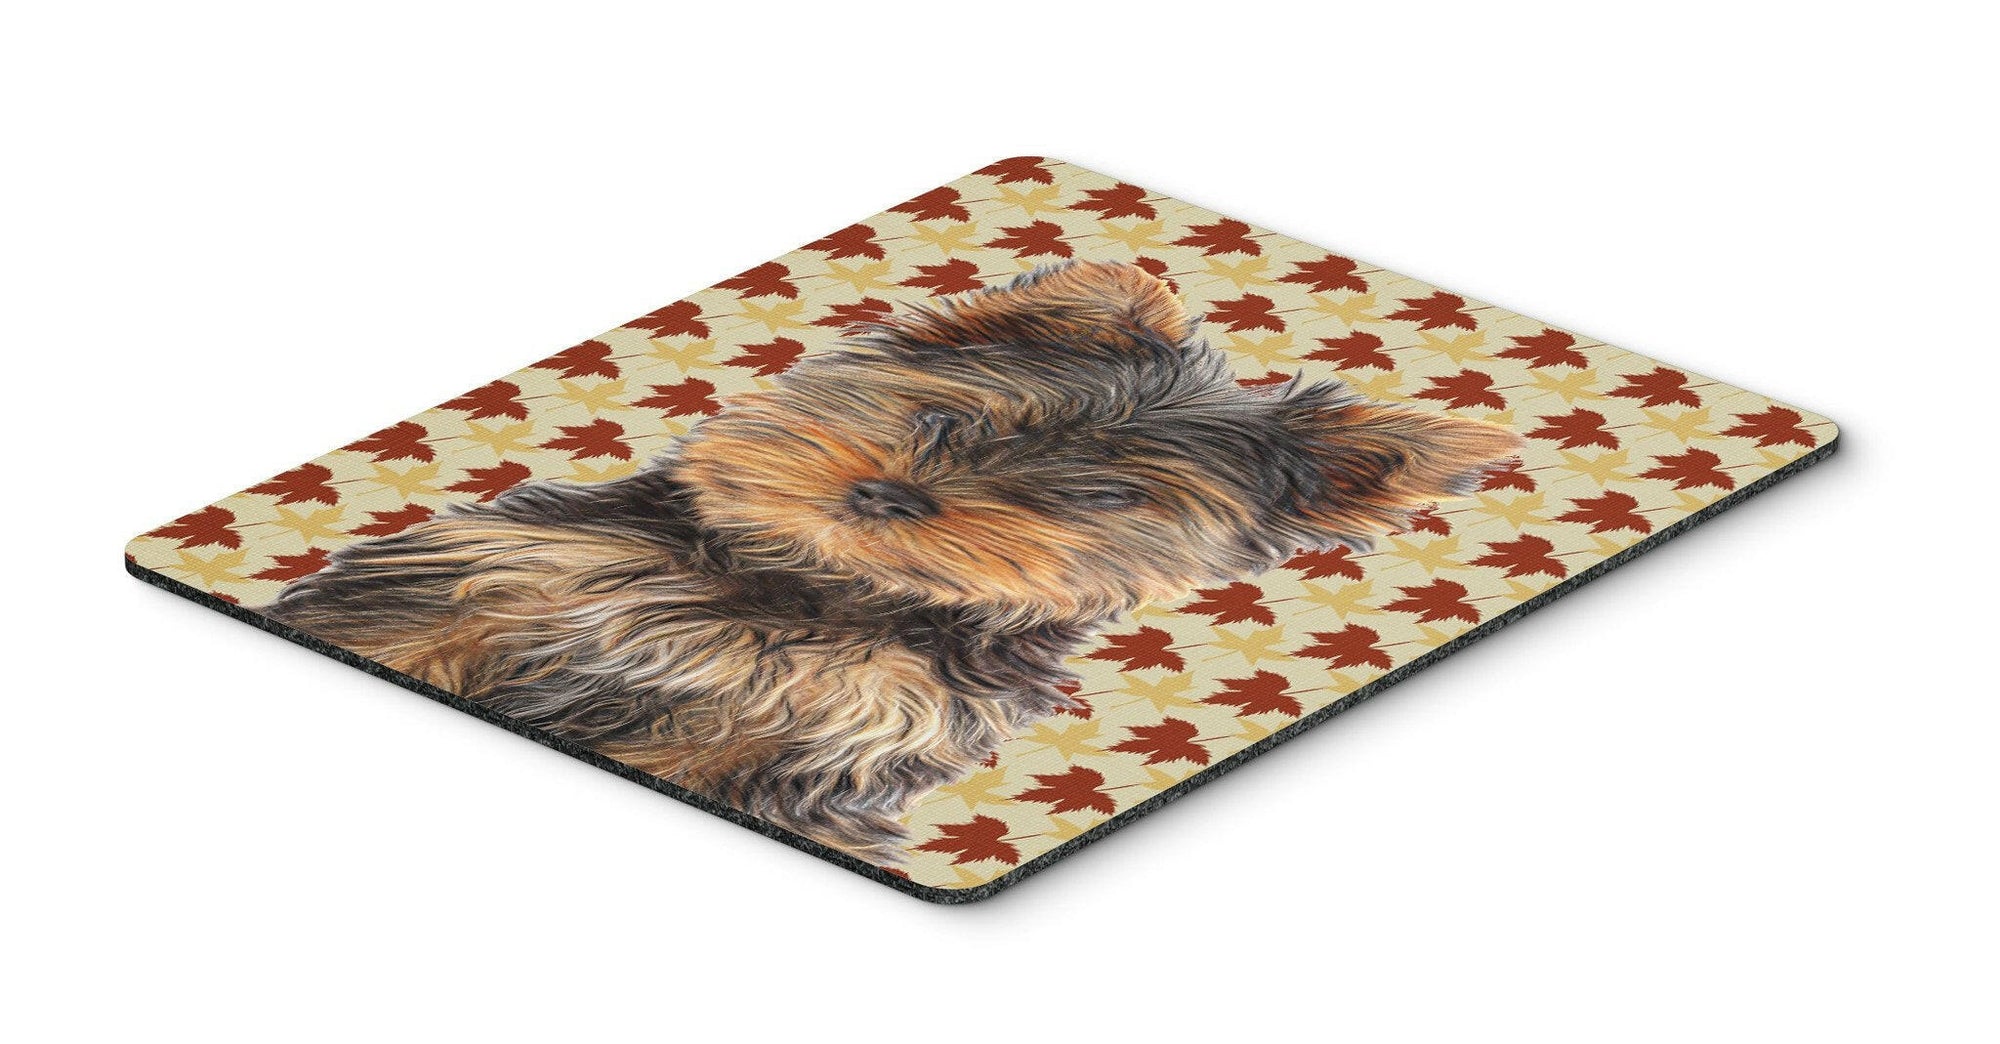 Fall Leaves Yorkie Puppy / Yorkshire Terrier Mouse Pad, Hot Pad or Trivet KJ1209MP by Caroline's Treasures